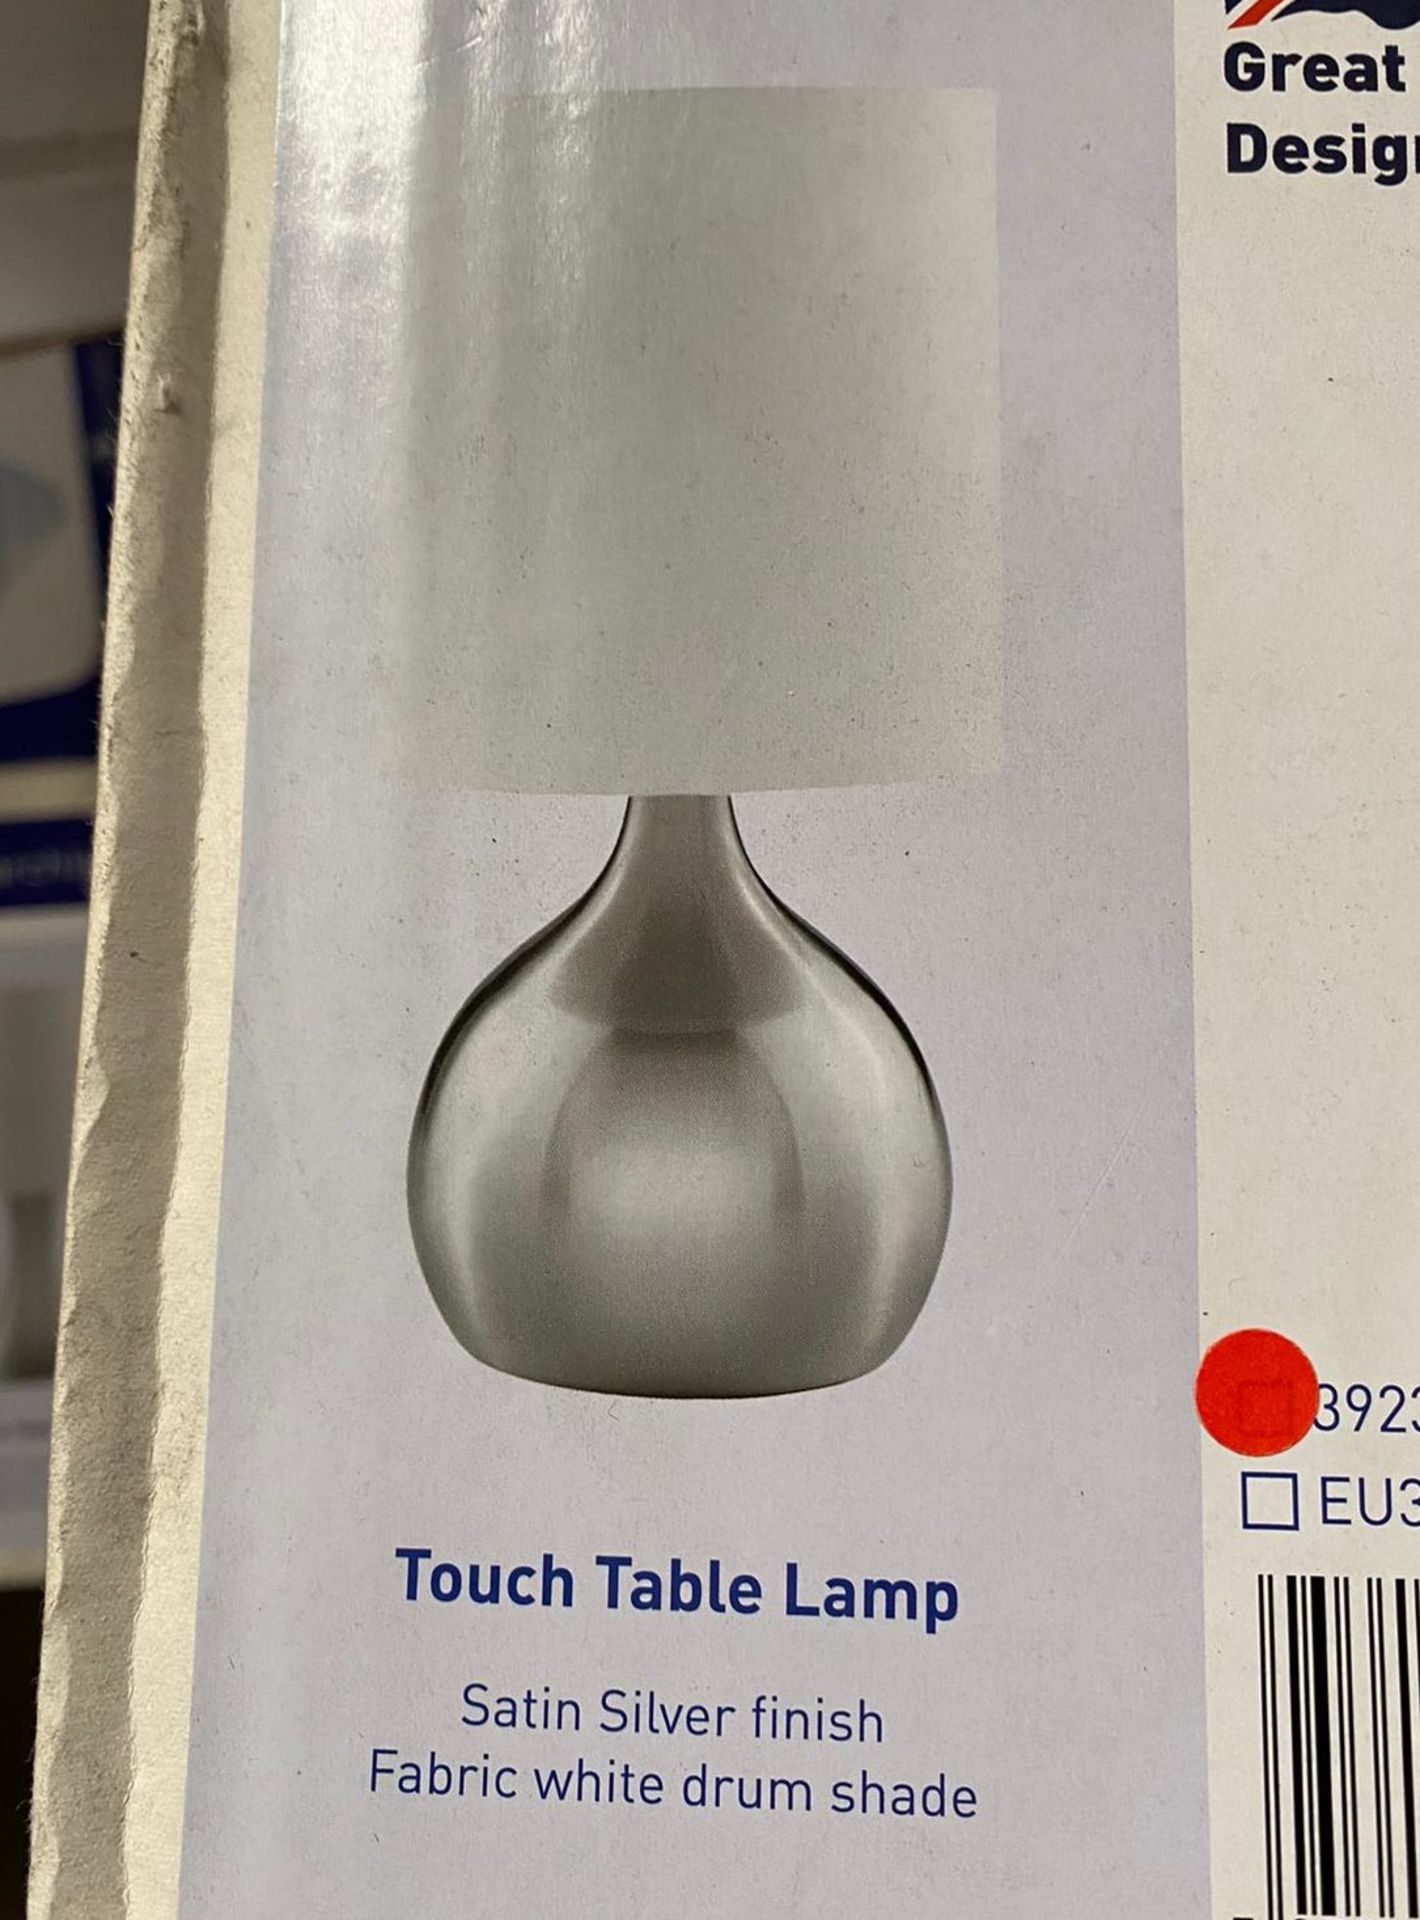 2 x Searchlight Touch Table Lamp in a satin silver finish - Ref: 3923SS - New and Boxed - - Image 3 of 4